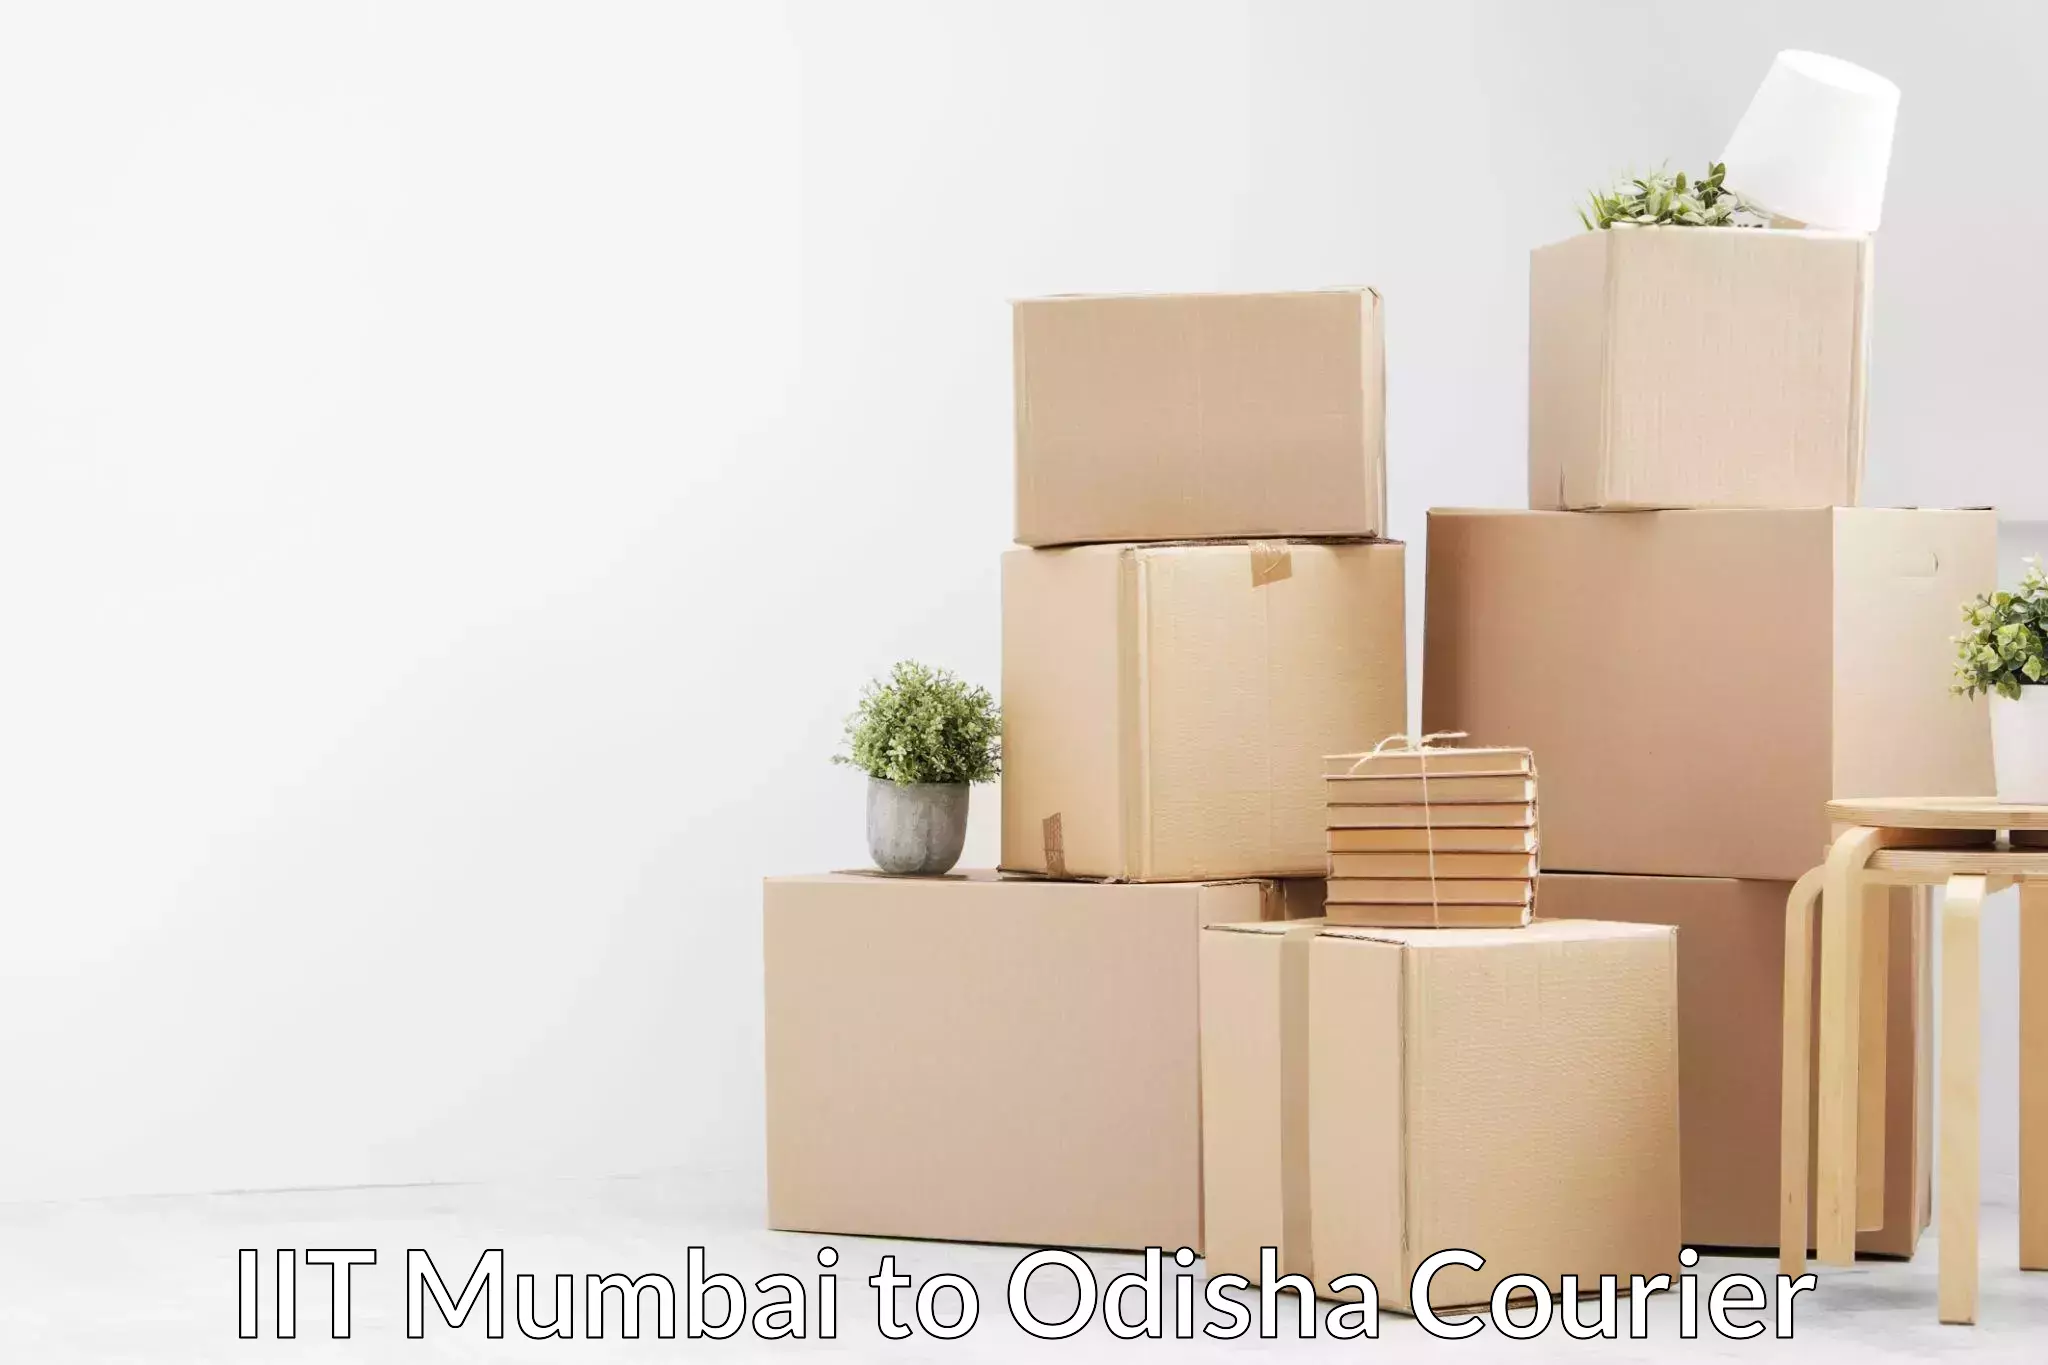 Moving and handling services in IIT Mumbai to Dhamara